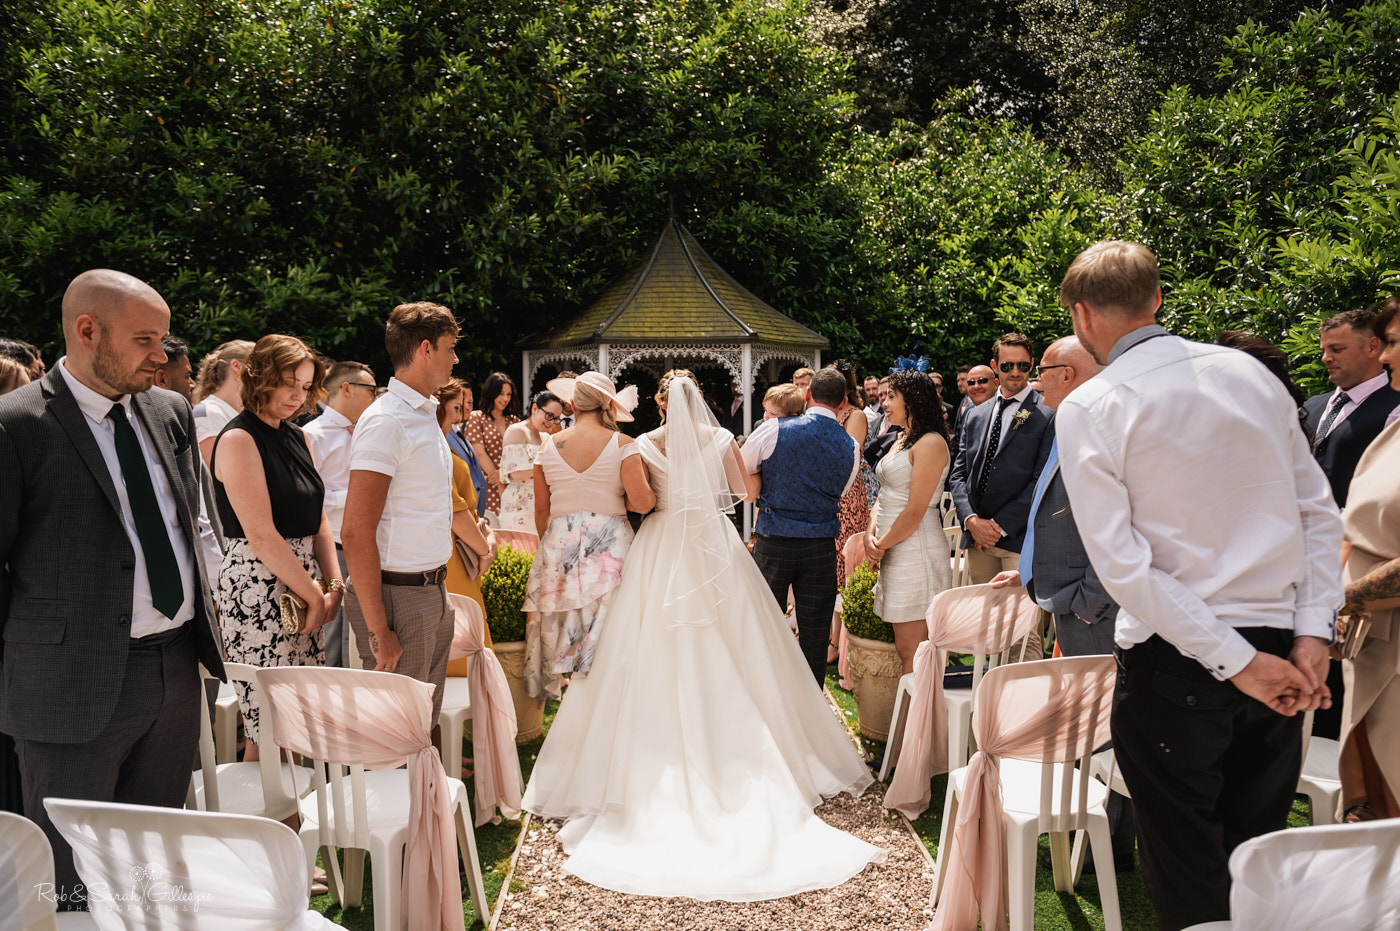 Outdoor wedding ceremony at Pendrell Hall in Staffordshire